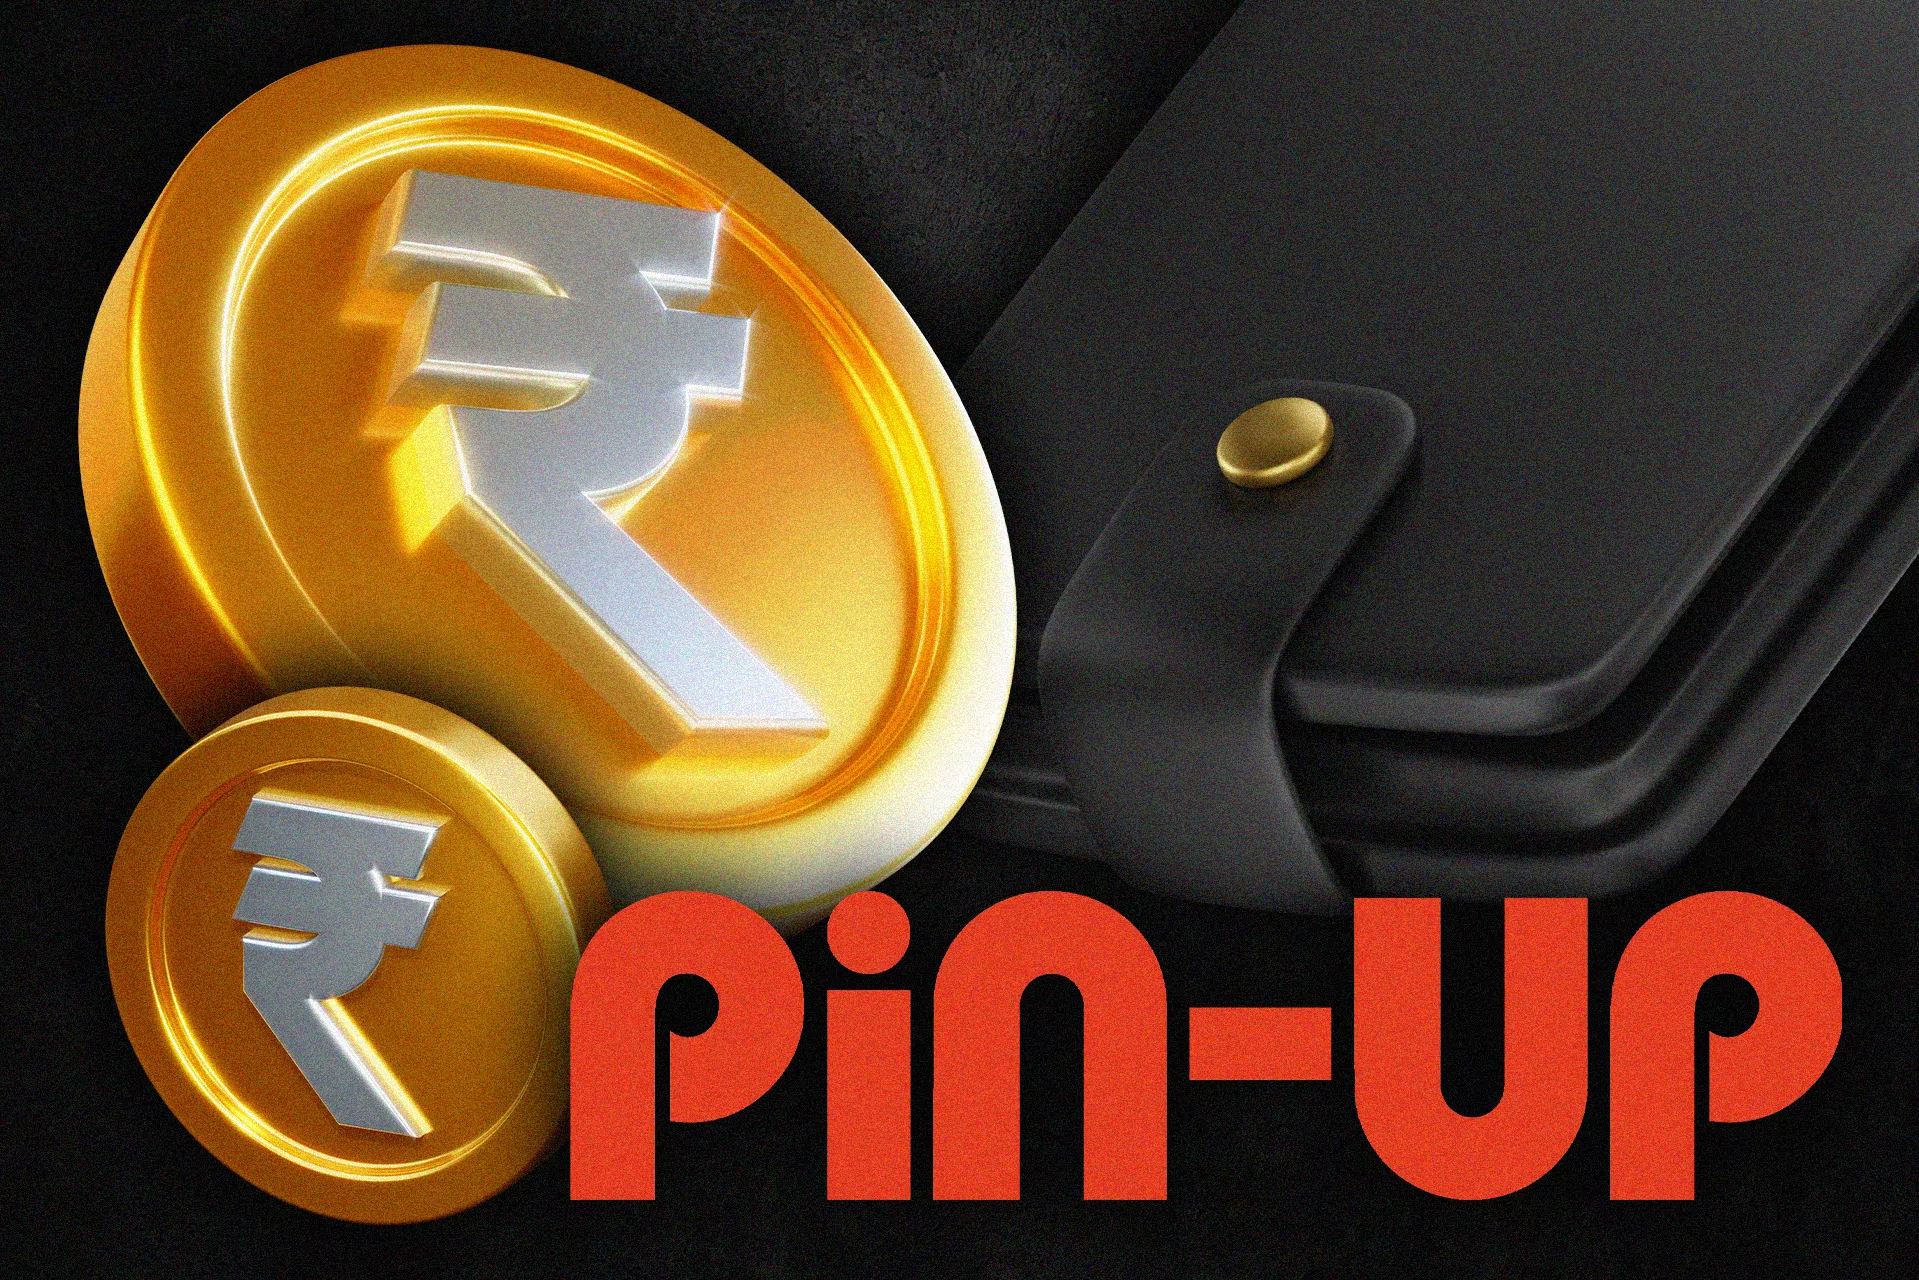 You can esuly and quickly deposit and withdraw money at Pin-Up.